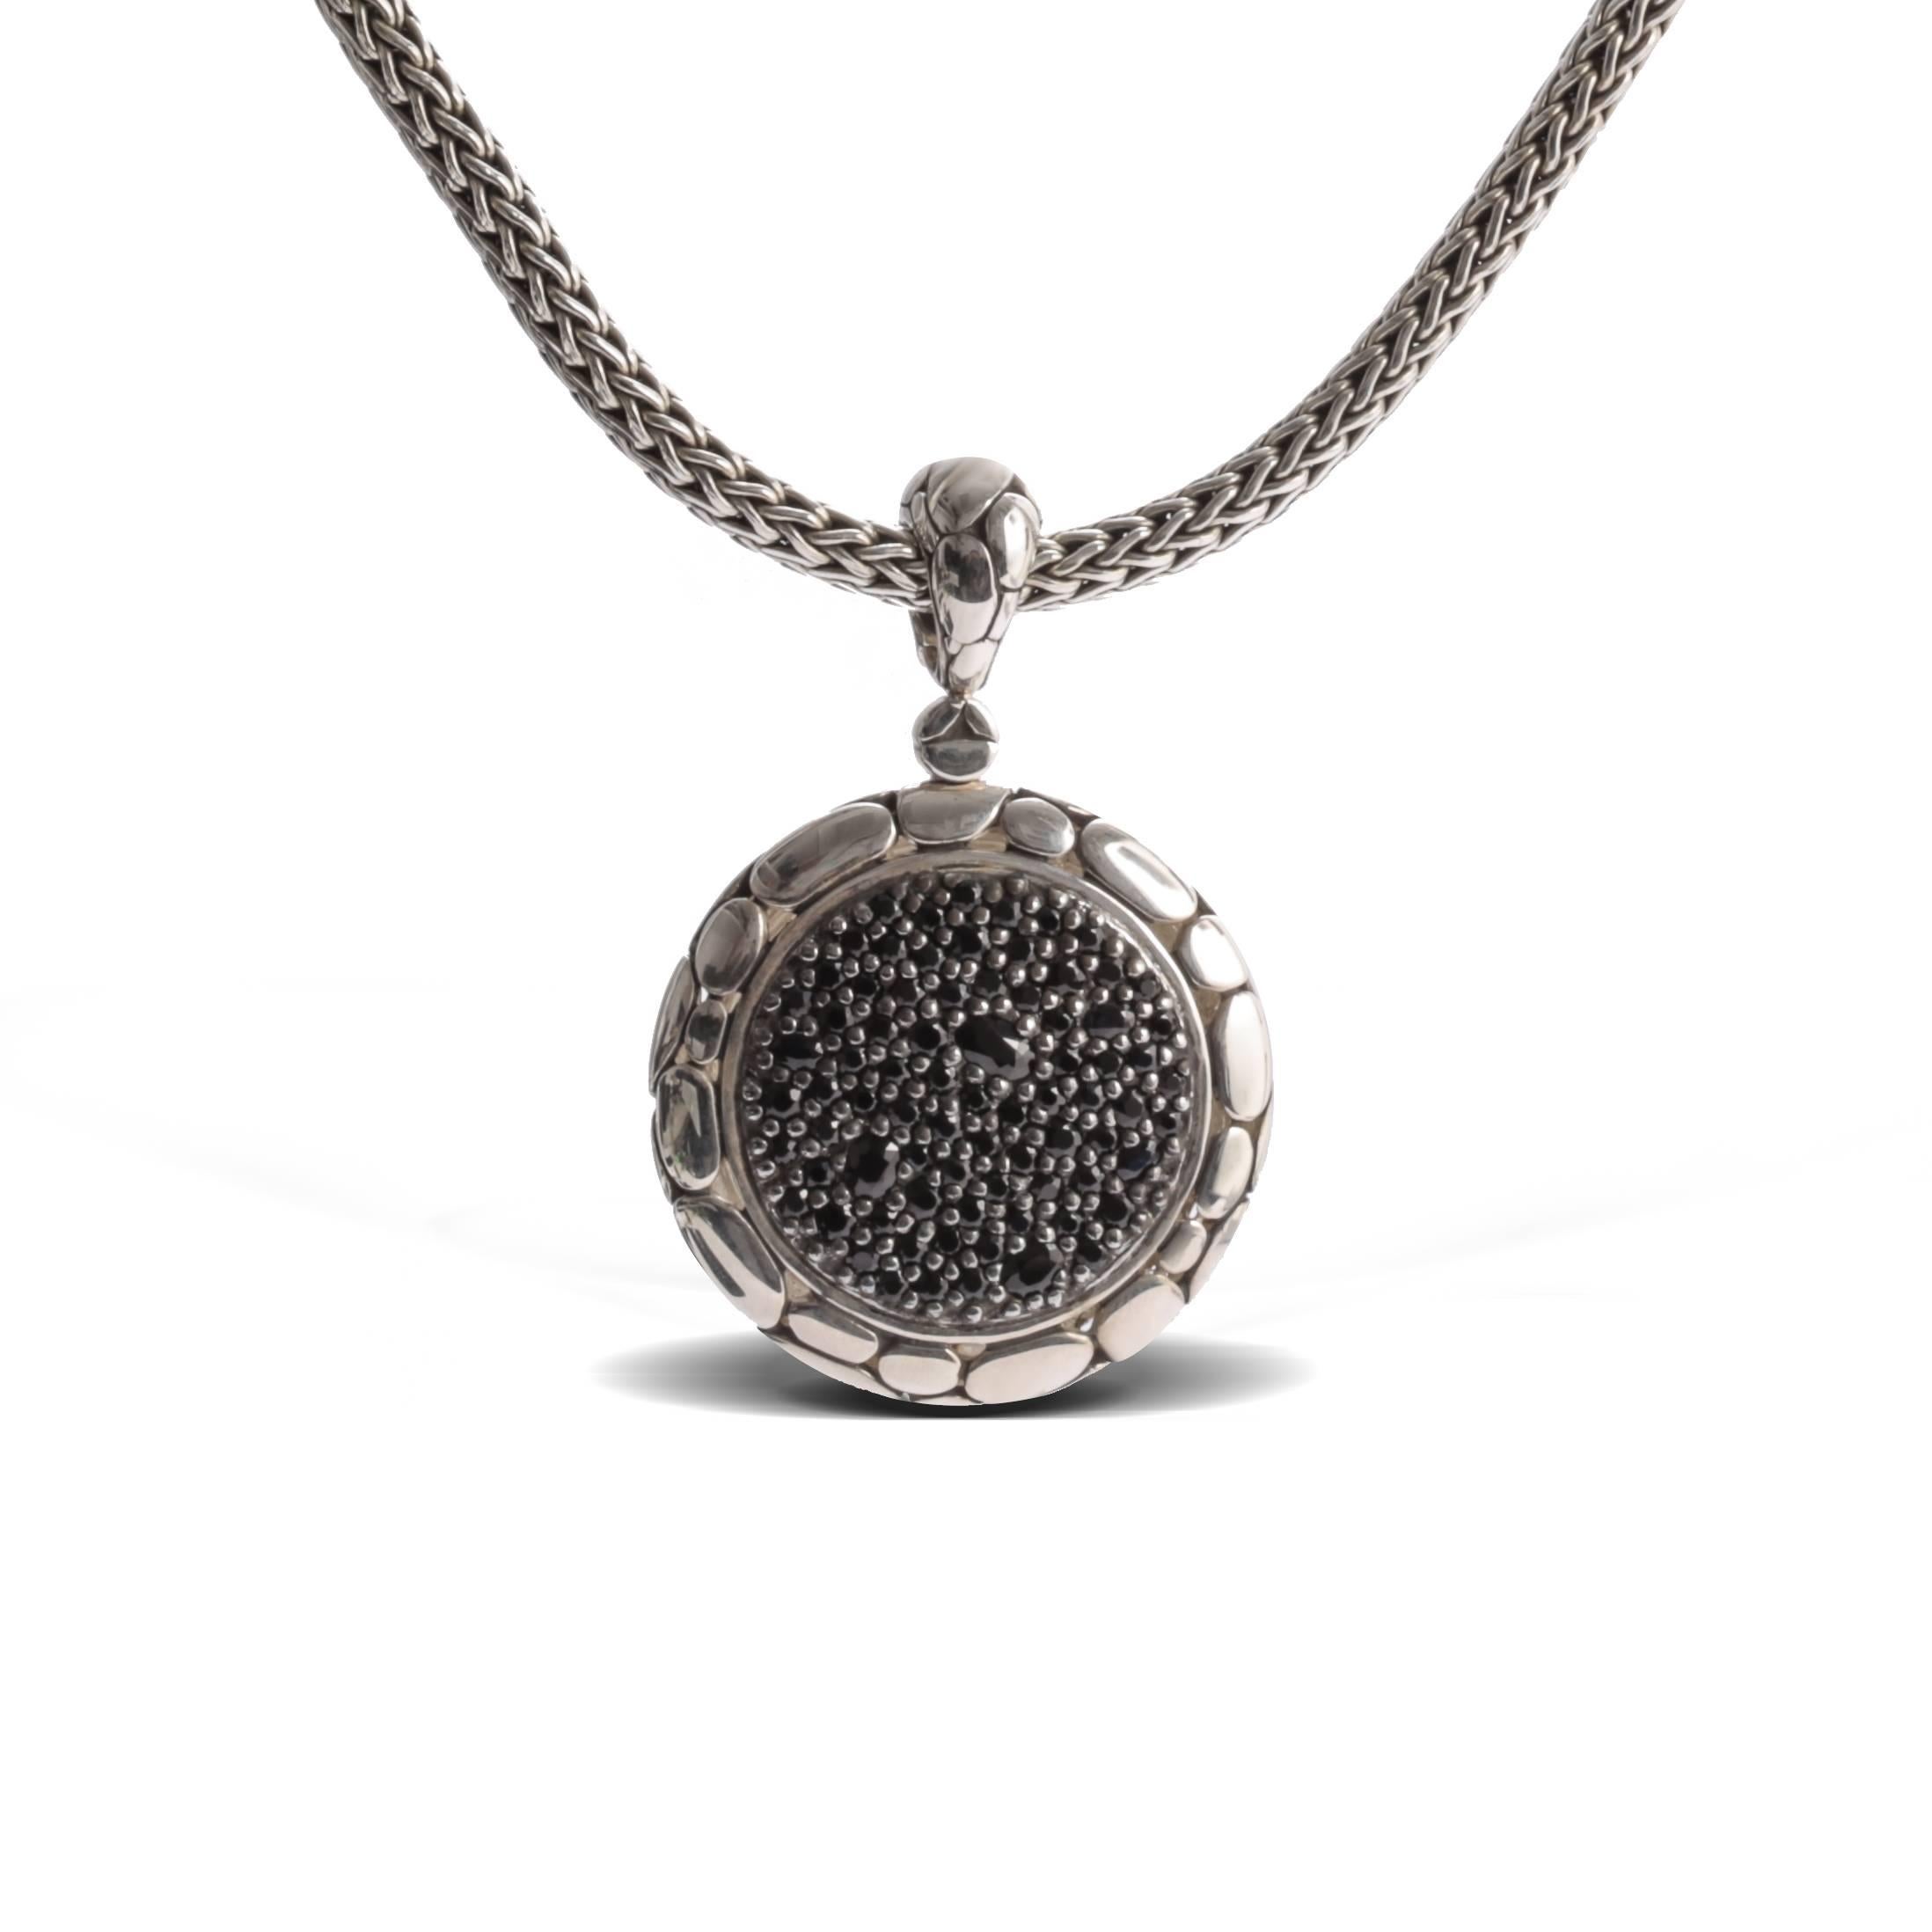 Previously loved sterling silver John Hardy Kali Lava Fire pendant featuring pave black sapphires at center with signature pebbled texture throughout piece and bail with openwork back.

